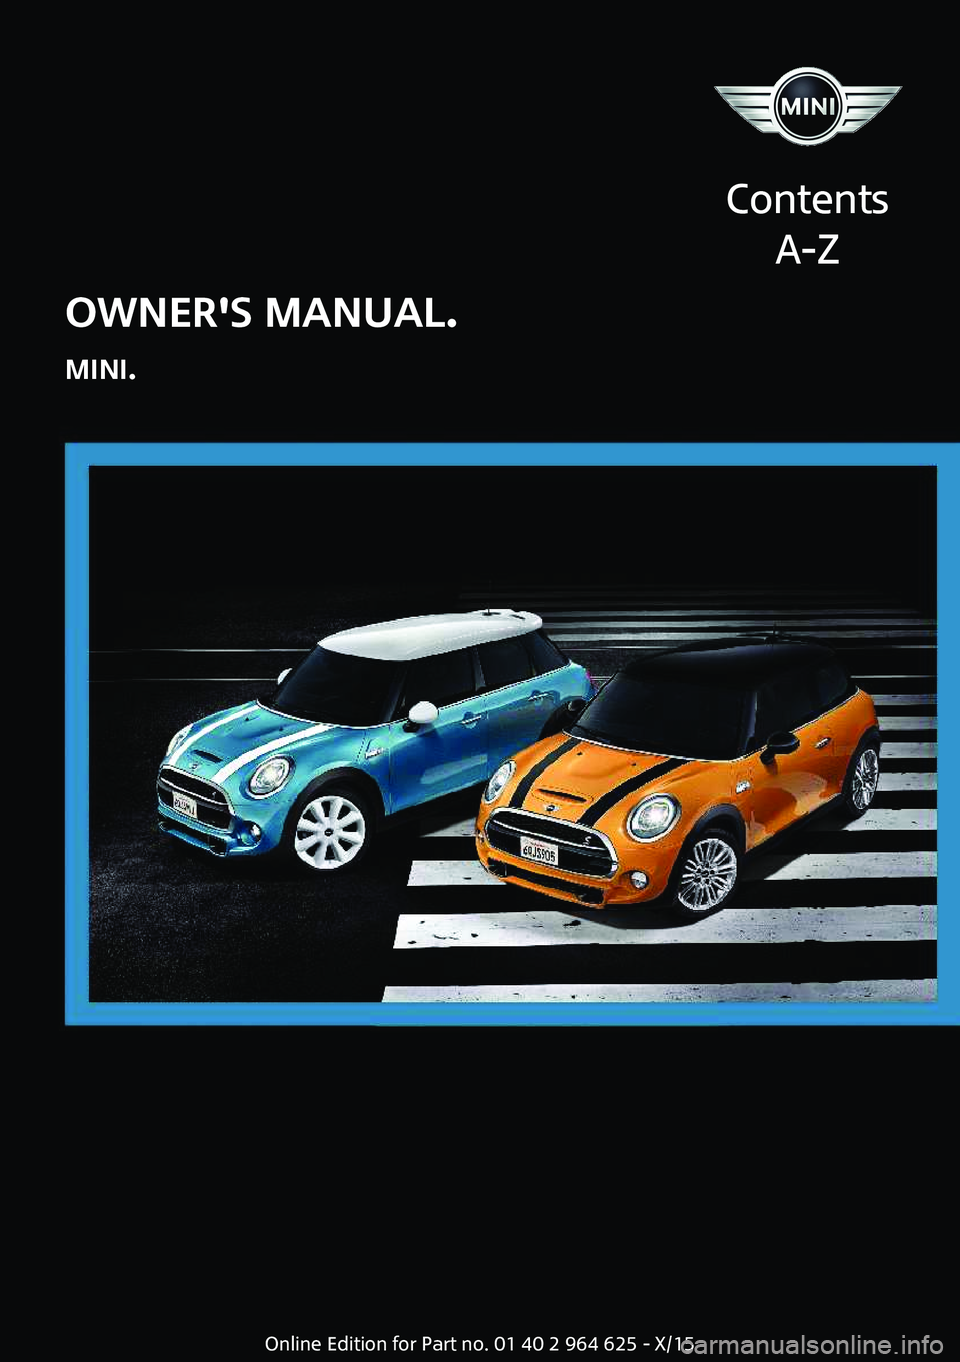 MINI COOPER 2015  Owners Manual OWNER'S MANUAL.
MINI.
Contents A-ZOnline Edition for Part no. 01 40 2 964 625 - X/15  